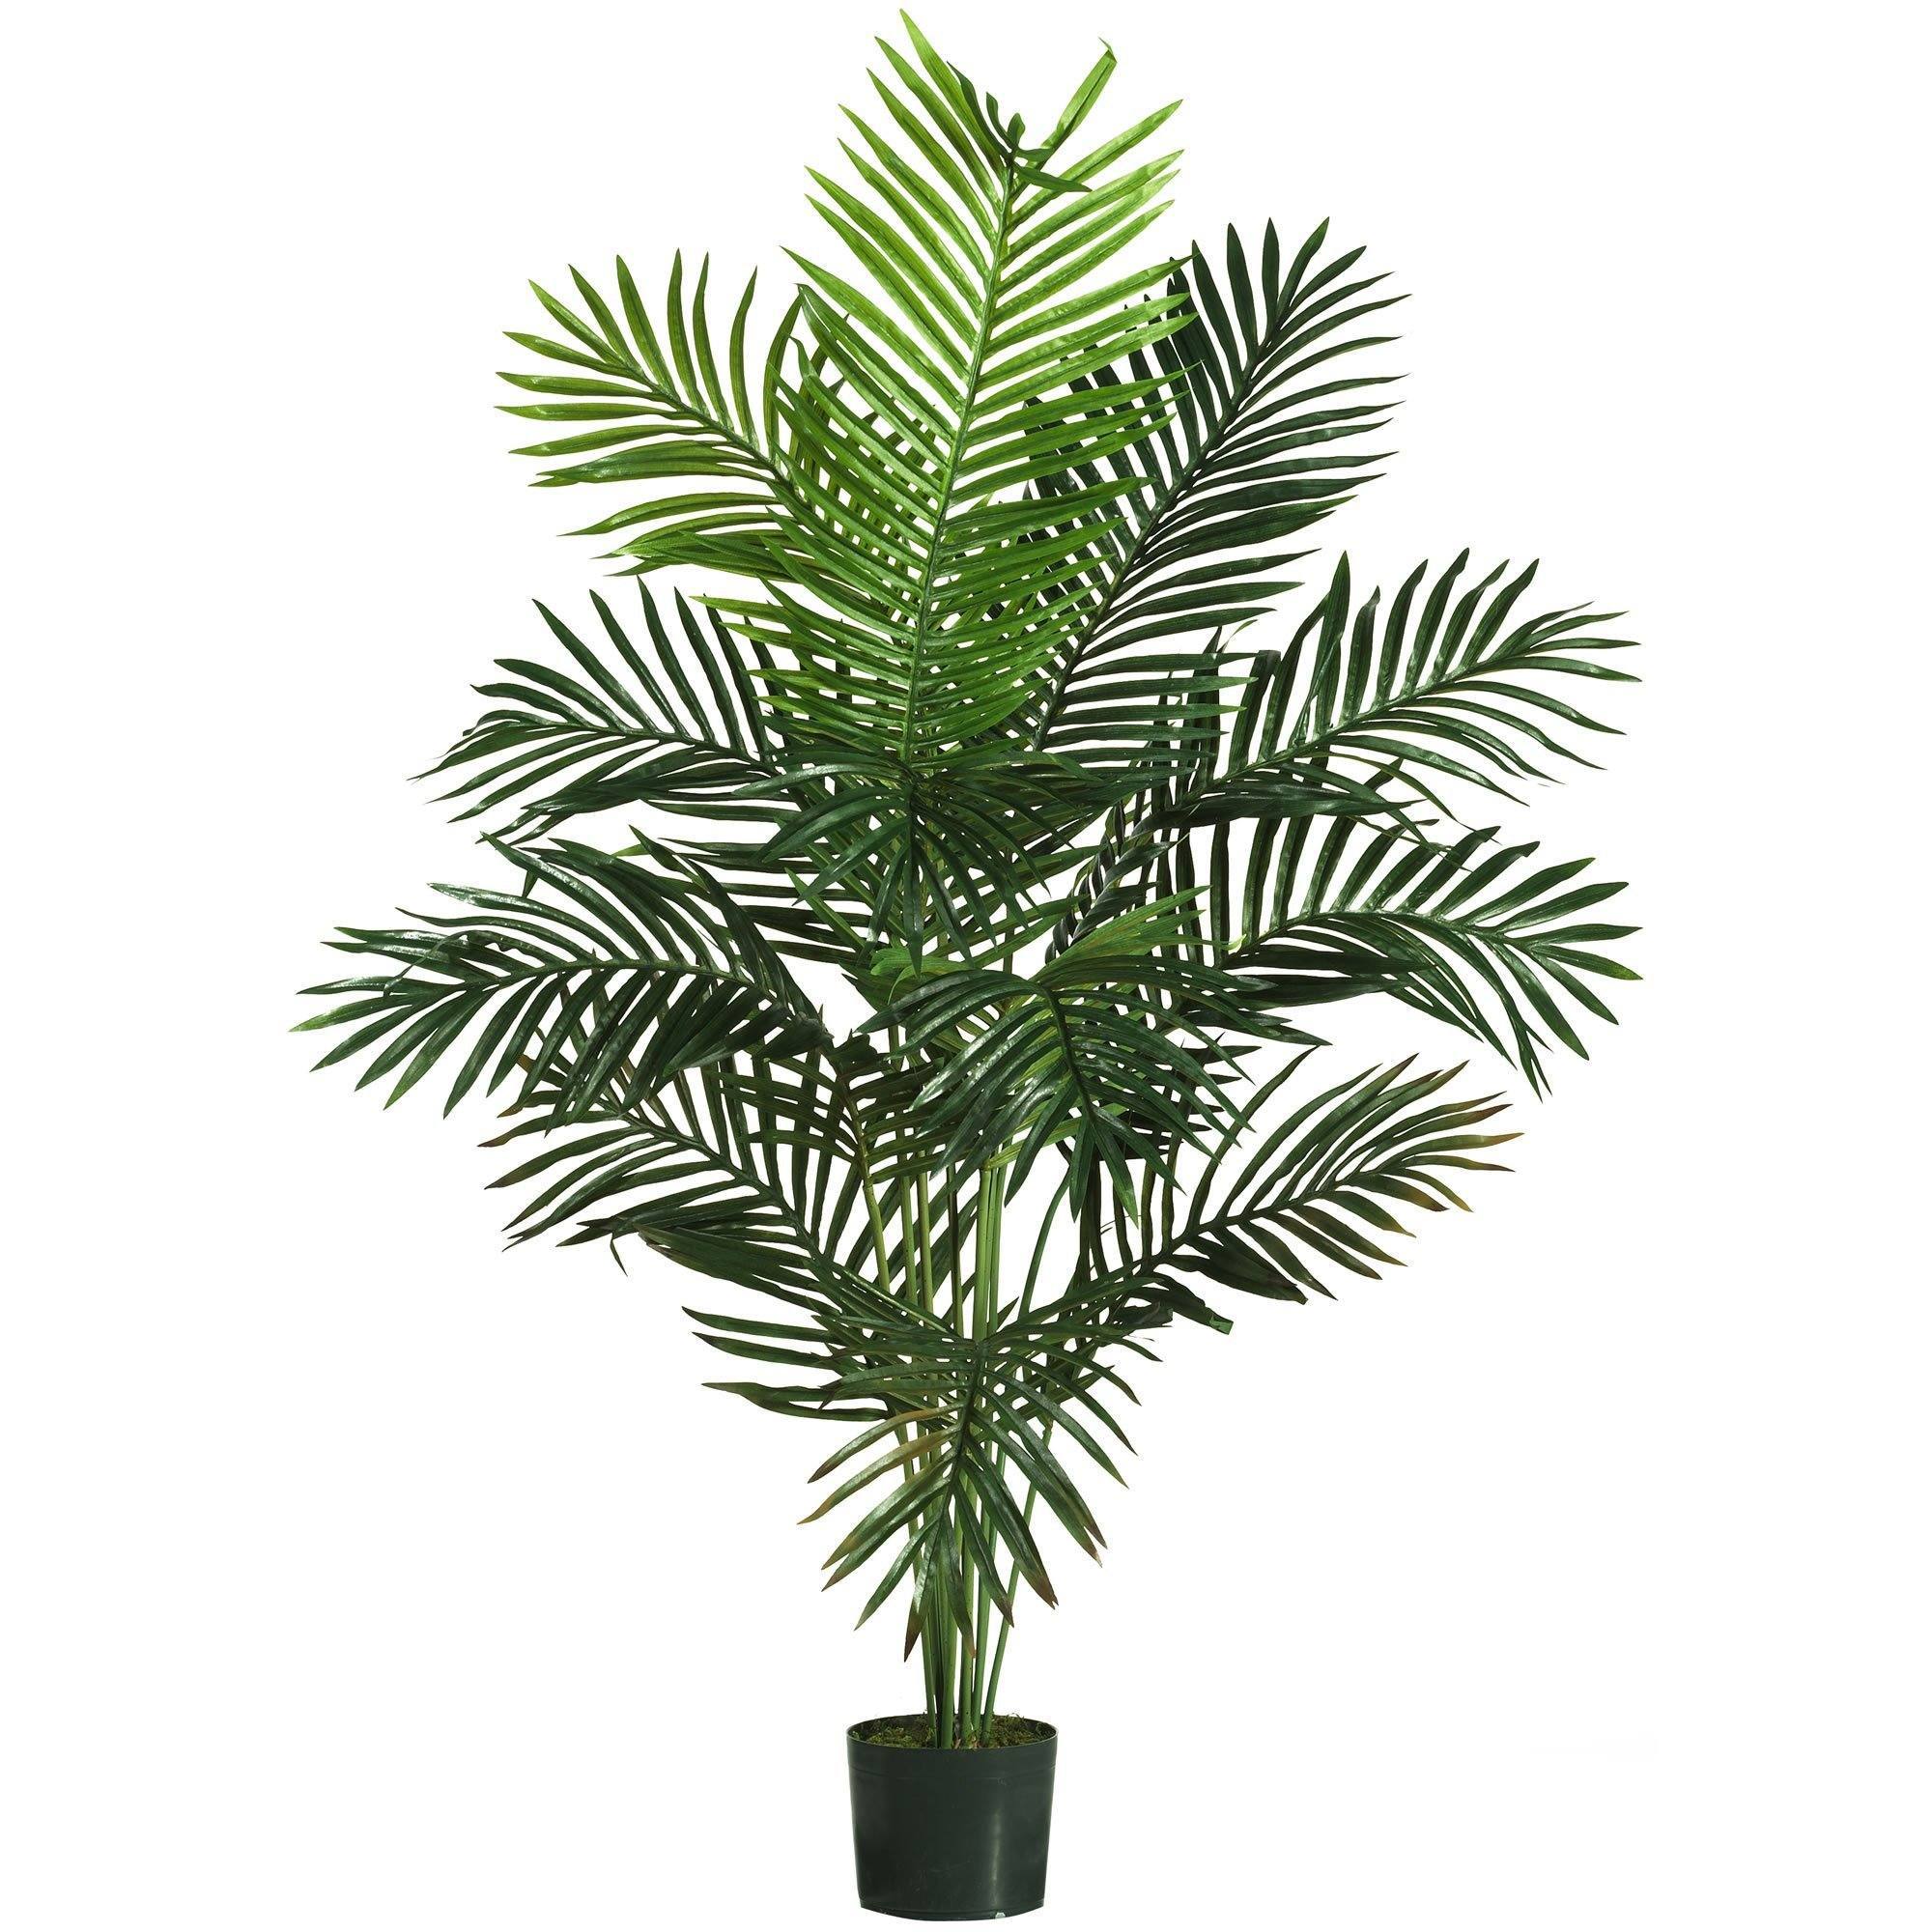 Palms of Paradise - Check Out Our Wholesale Price List ﻿Here﻿